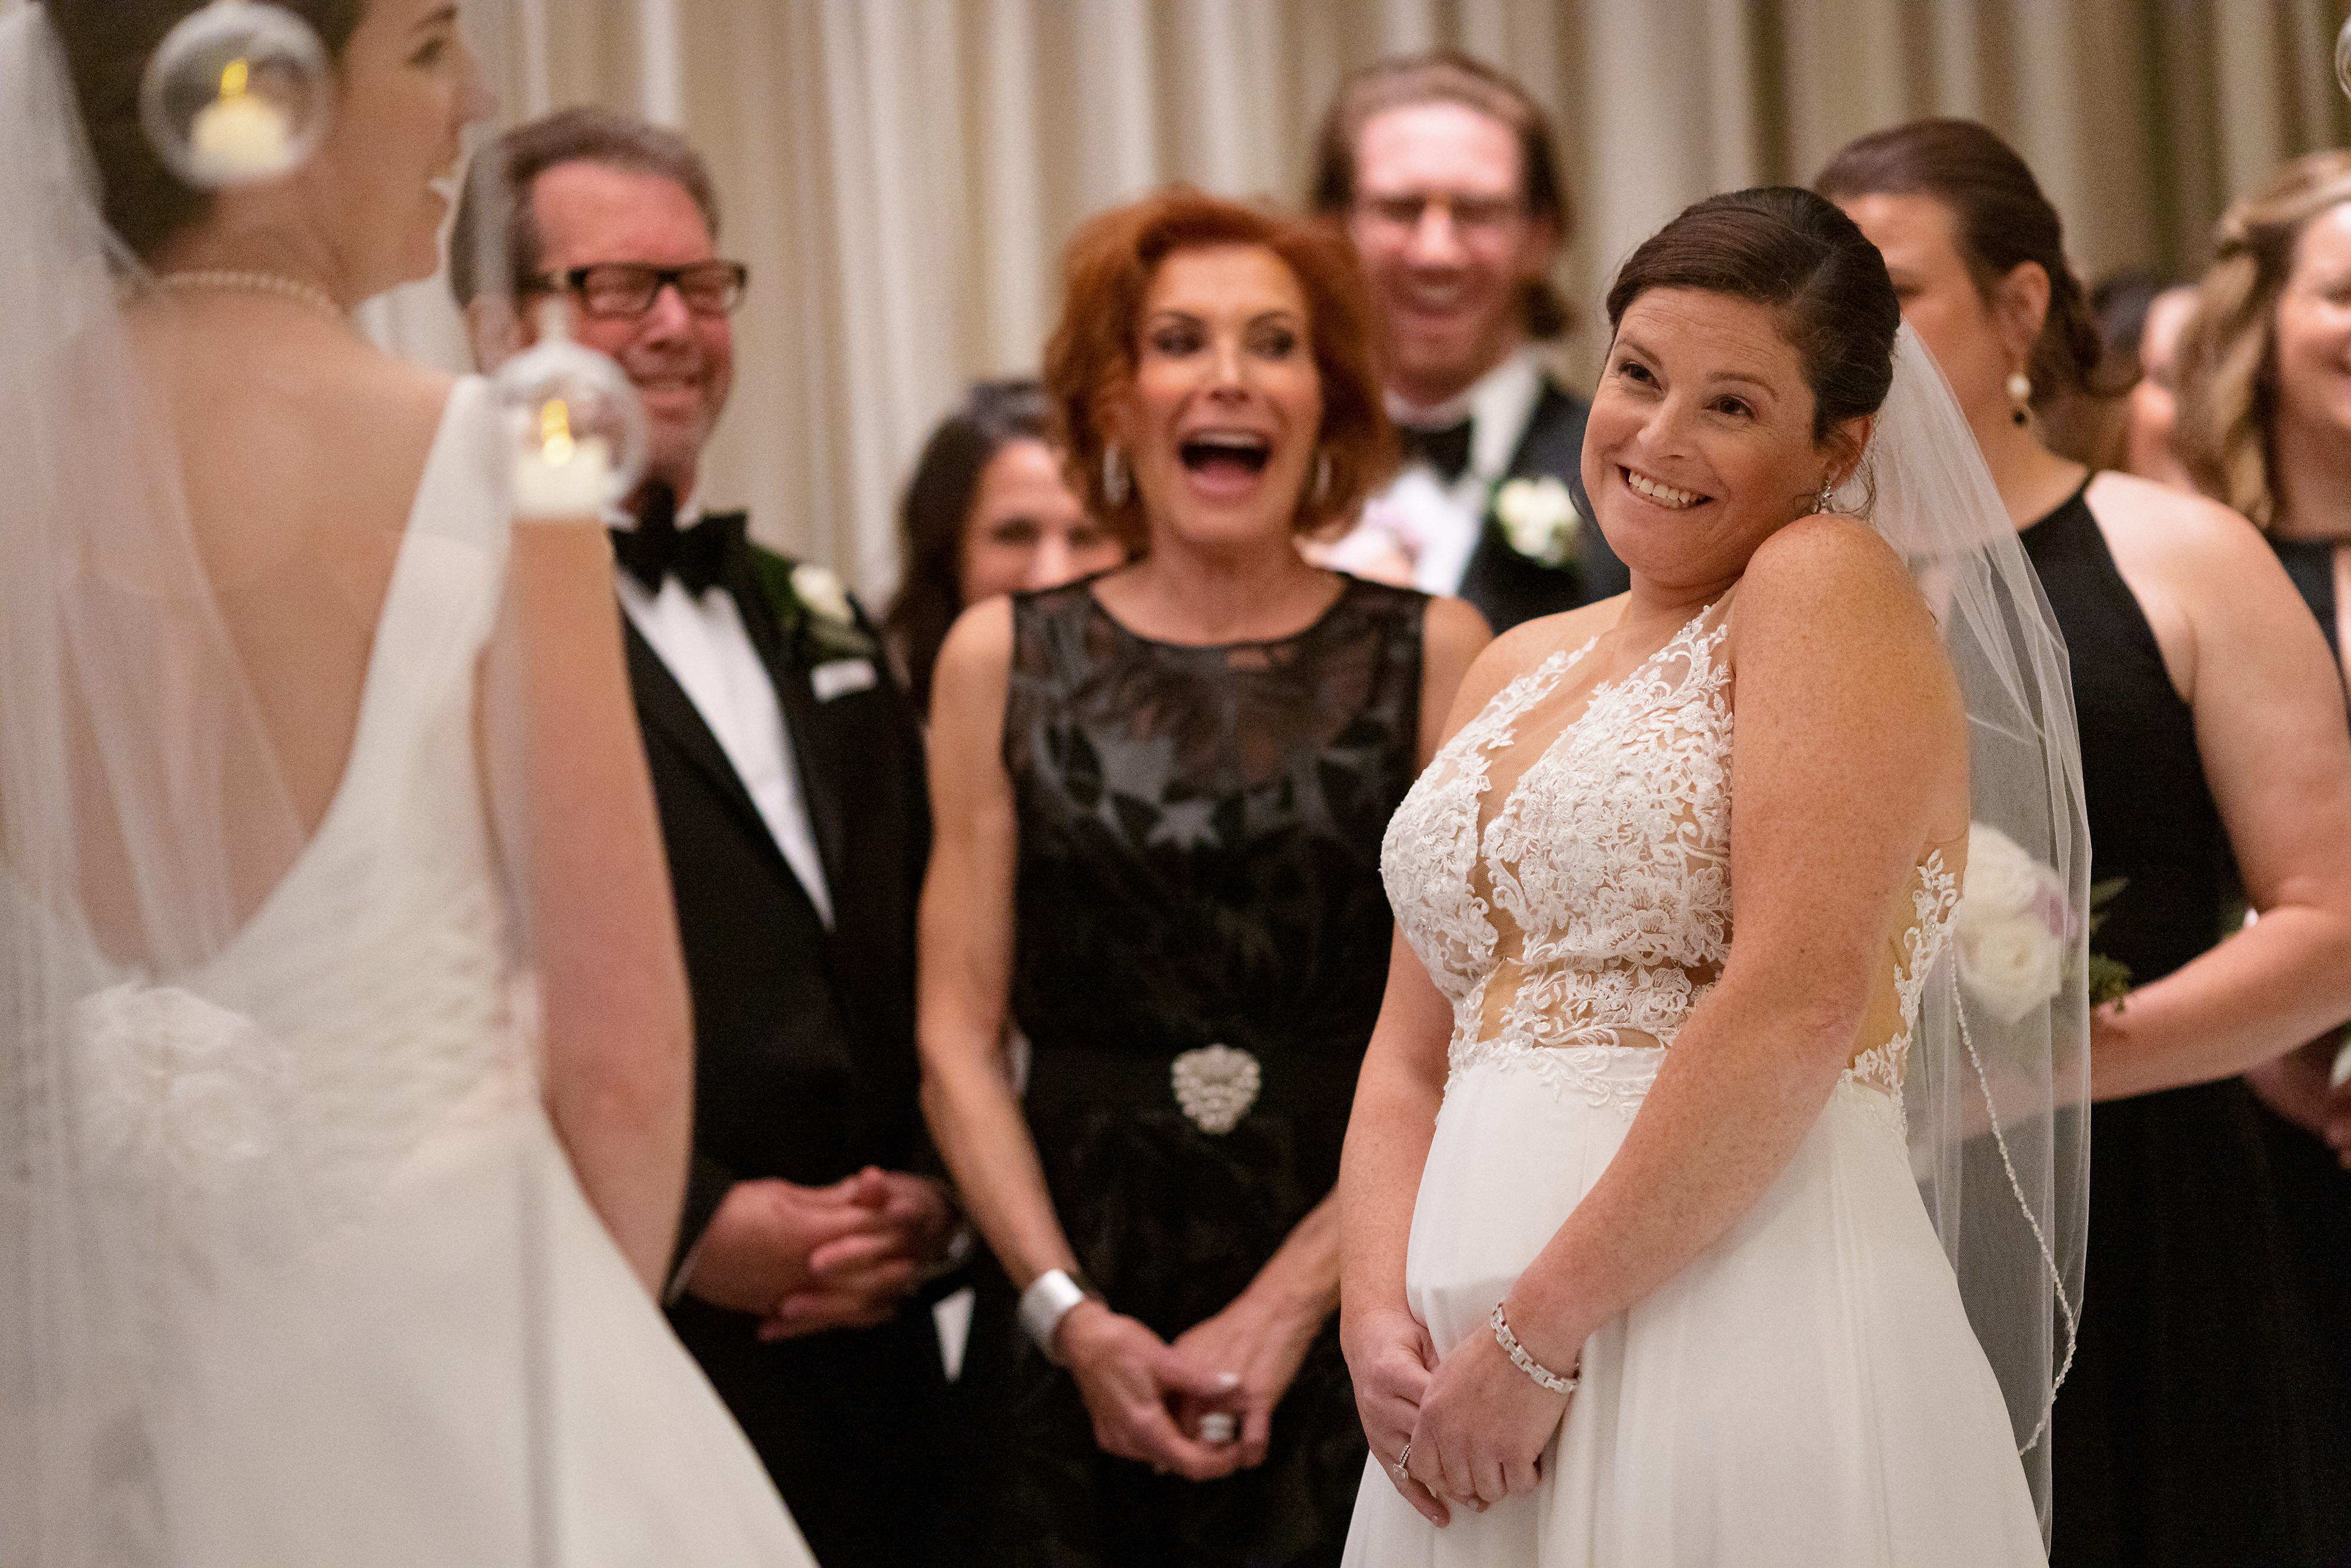 Brides laugh during wedding ceremony at The Langham Hotel in downtown Chicago